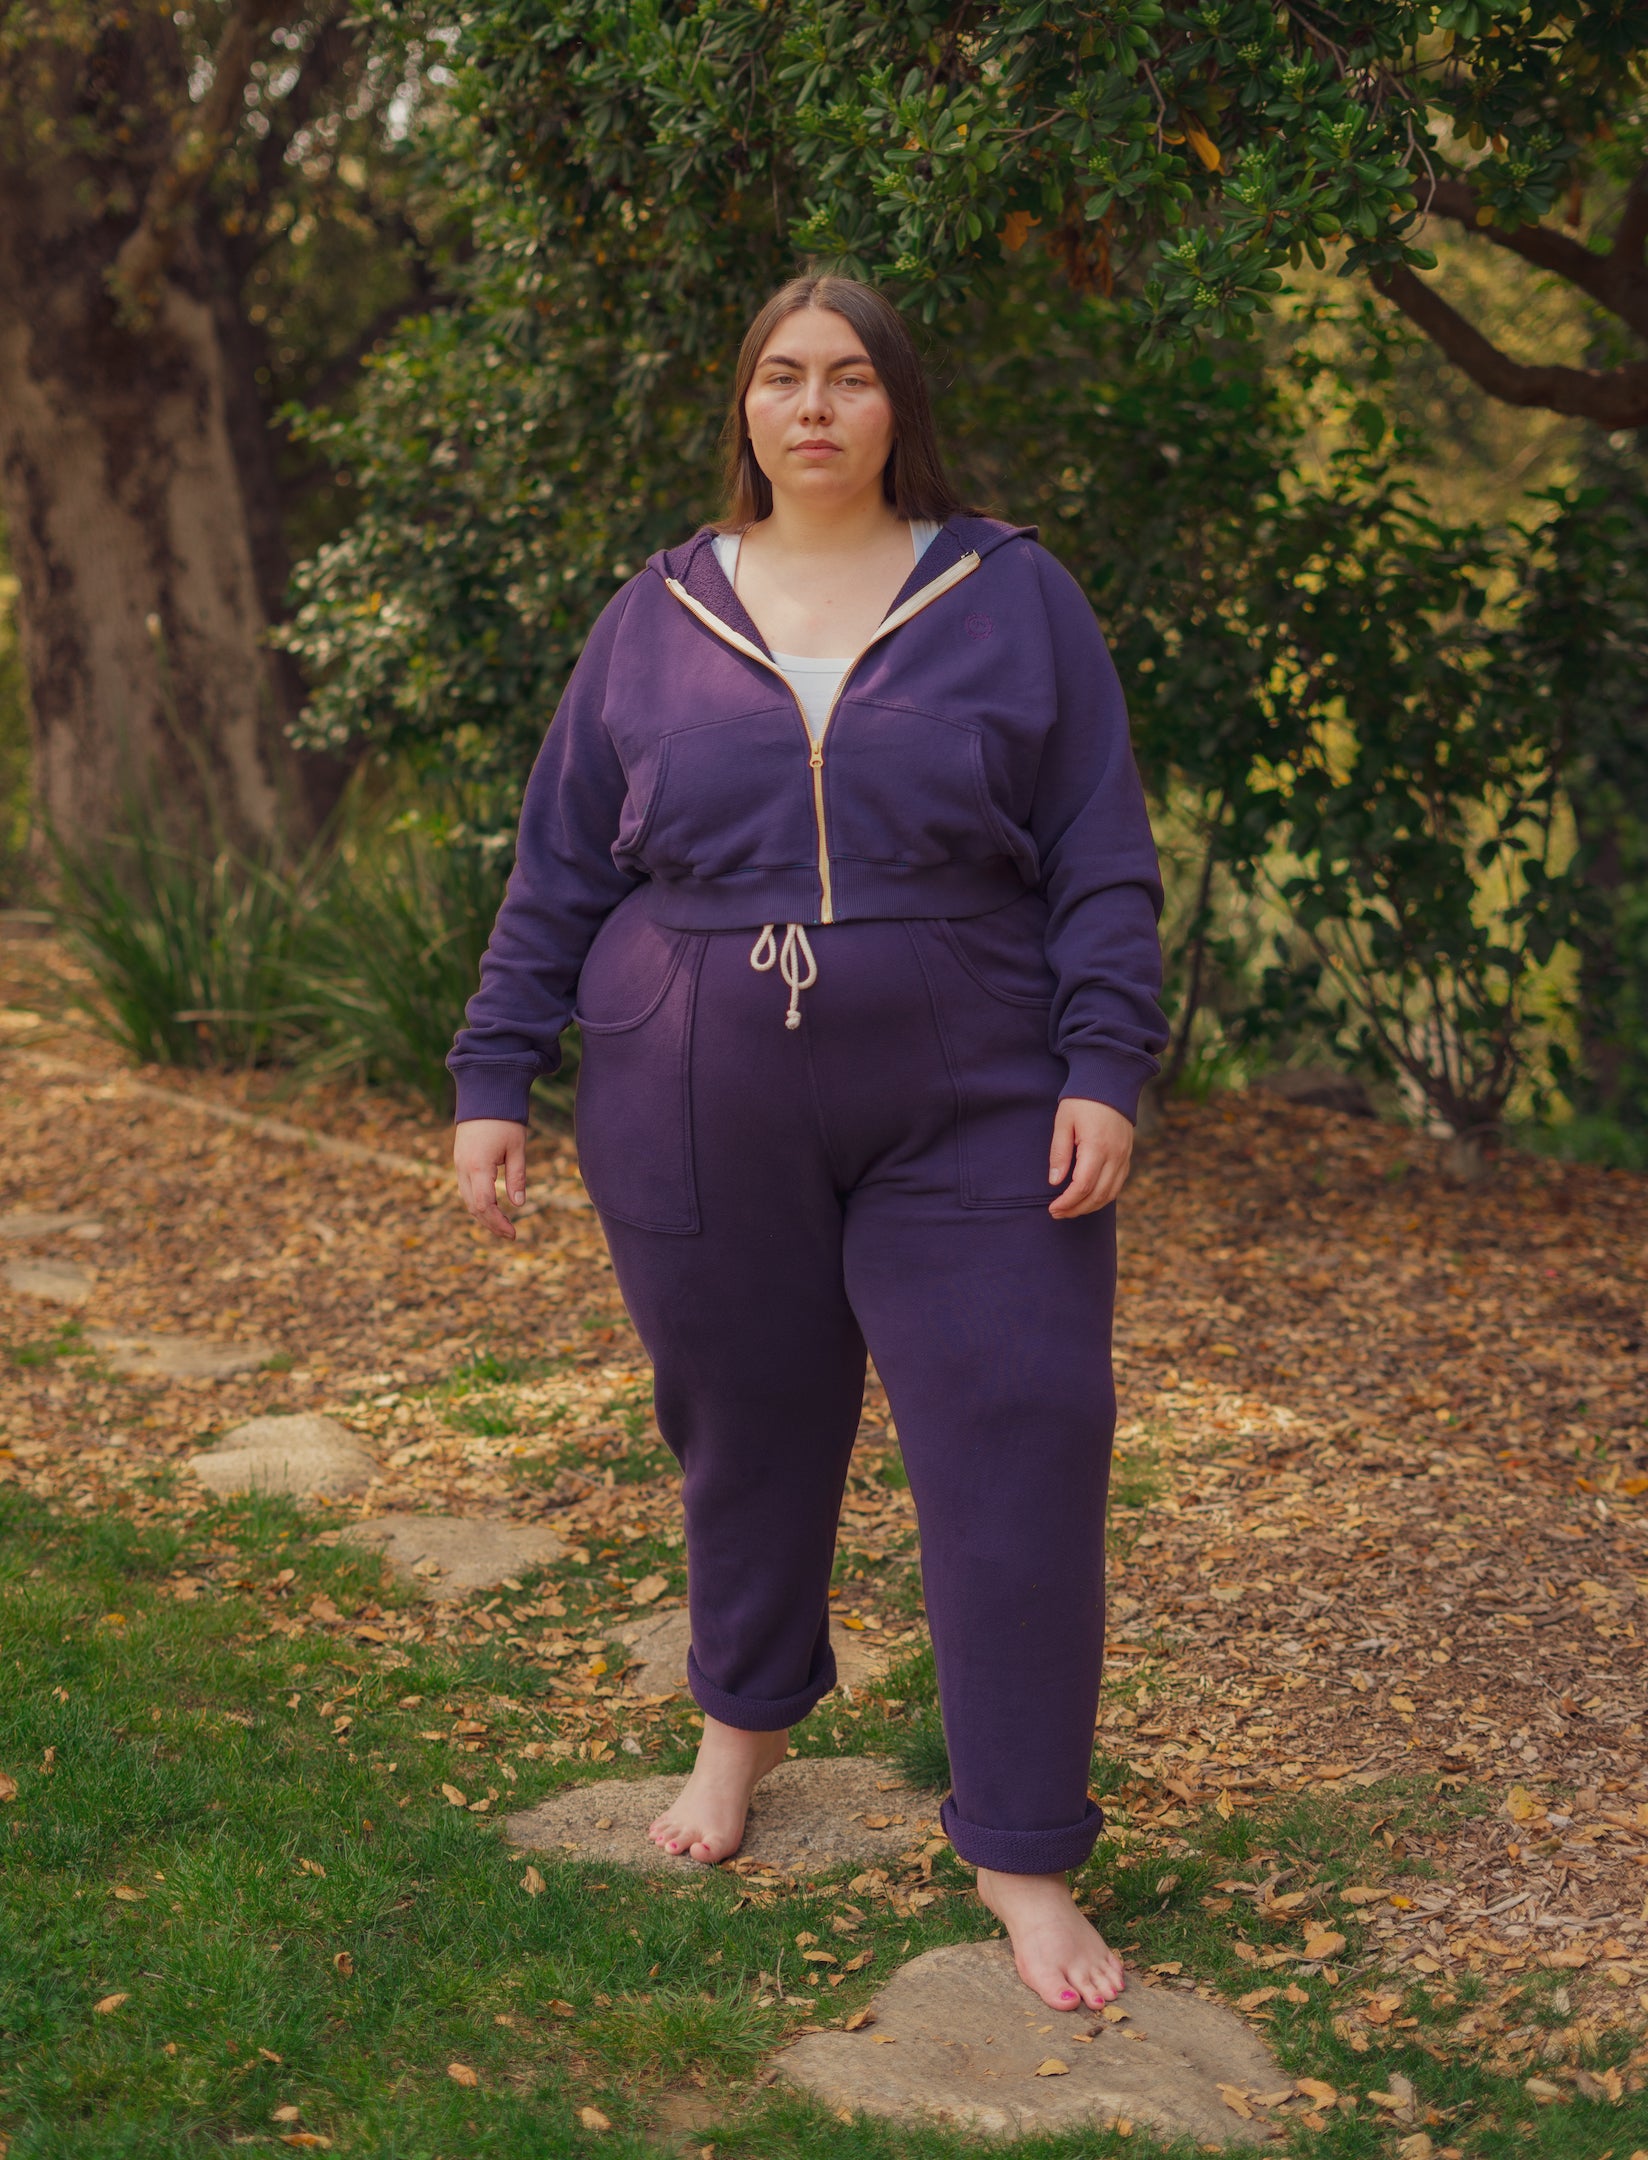 Marielena is wearing Cropped Zip Hoodie in Nebula Purple and matching Rolled Cuff Sweat Pants